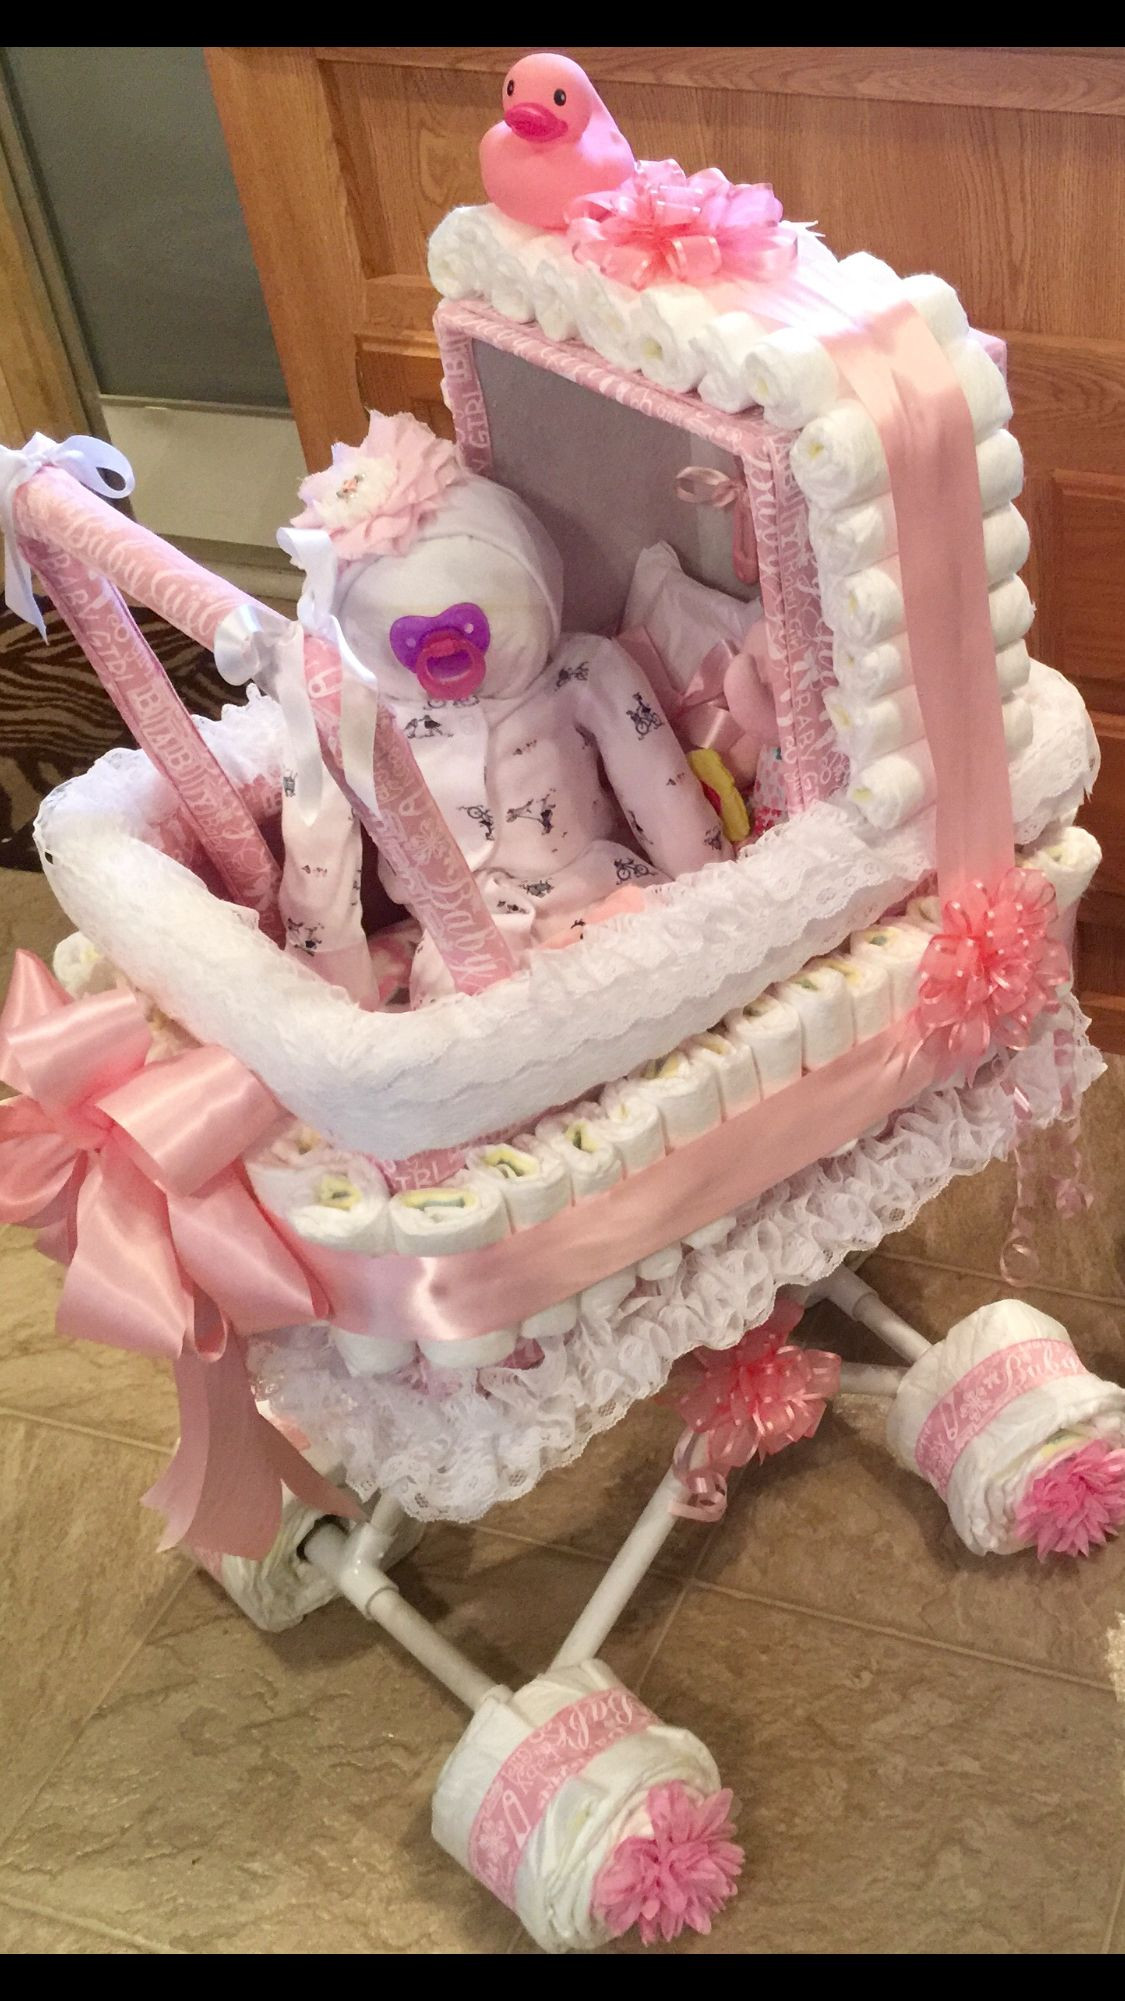 Diaper Gift Ideas For Baby Shower
 Instead of a diaper cake for baby shower I made my